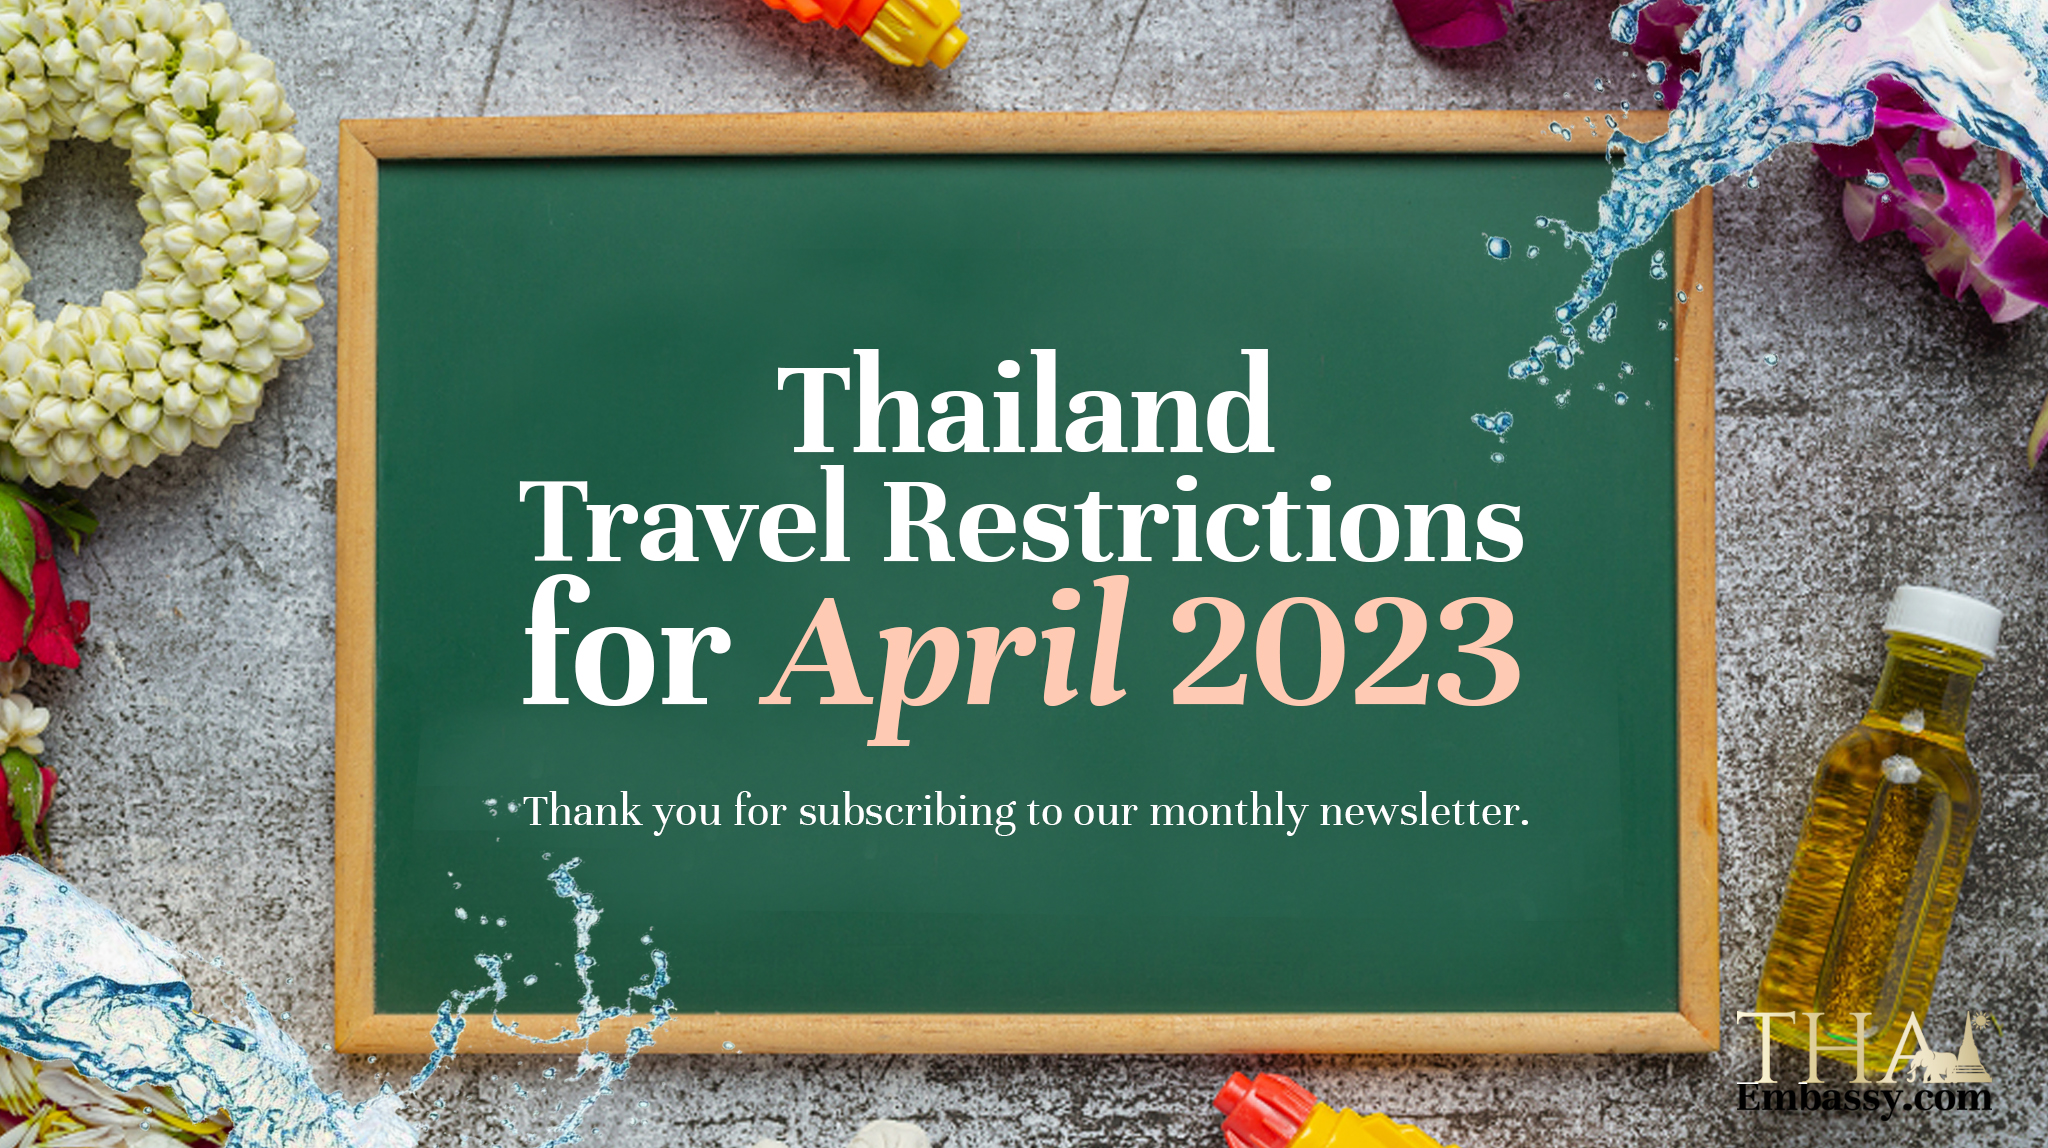 pakistan to thailand travel restrictions